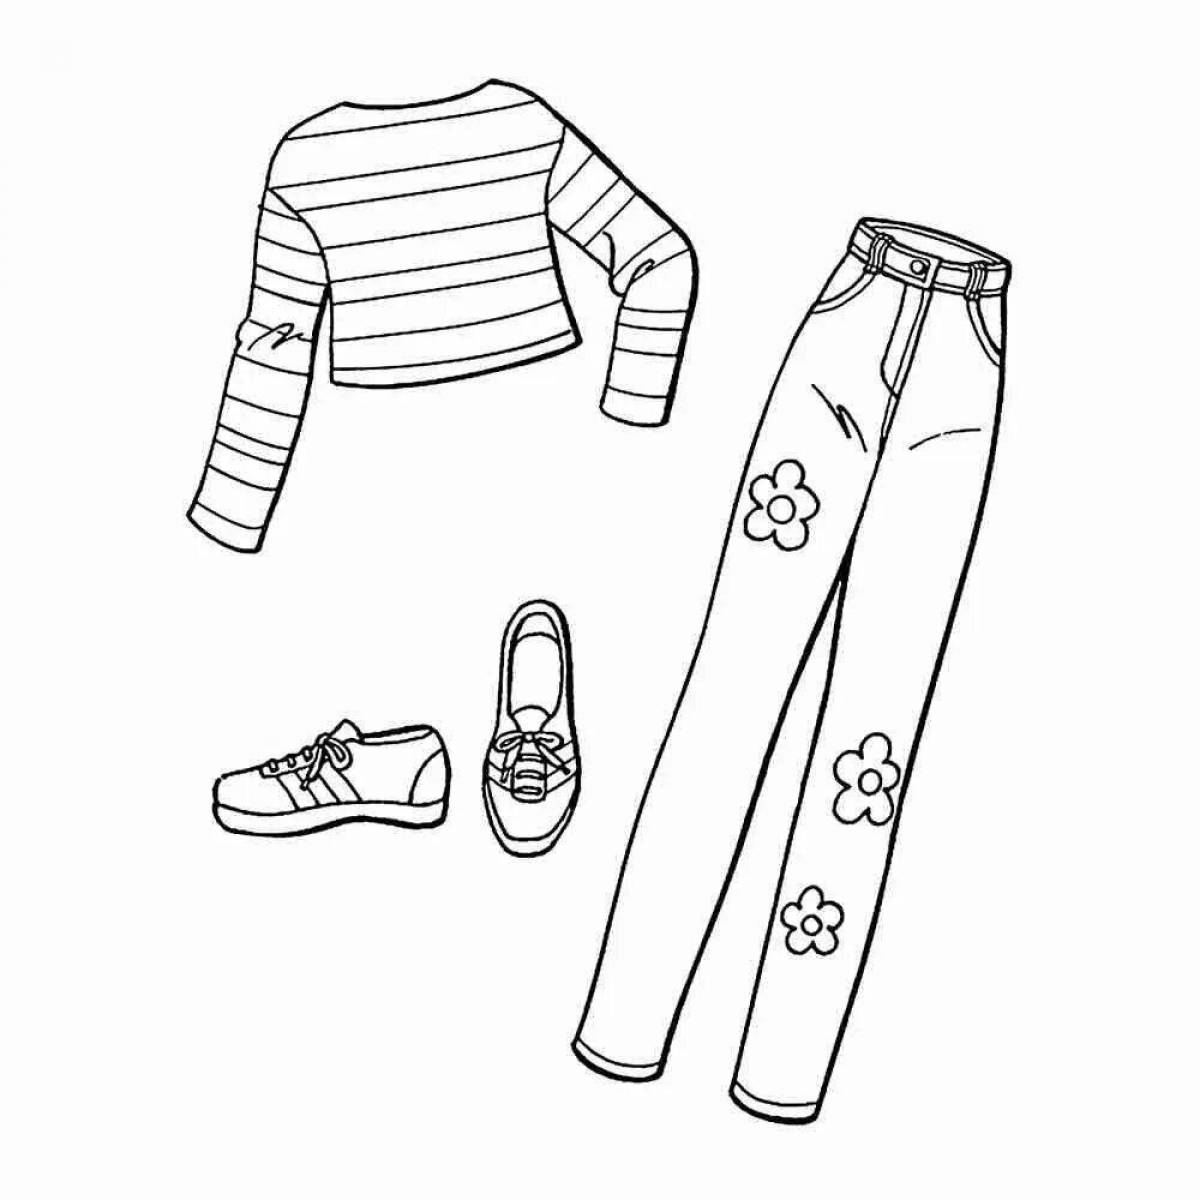 Consolation jersey coloring page